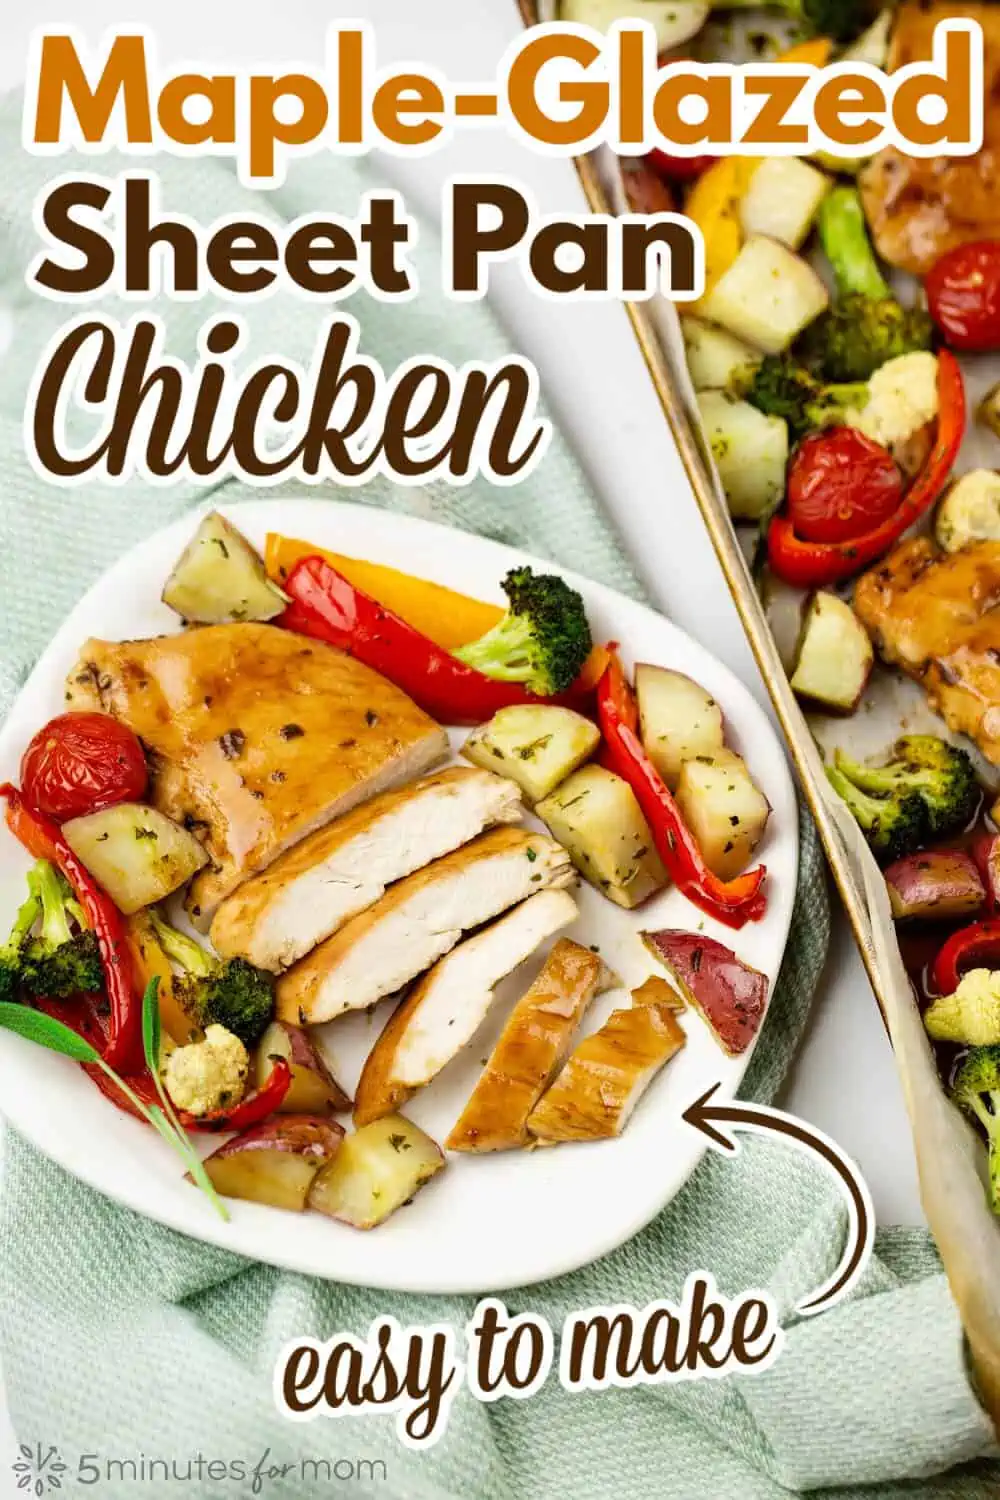 Dinner plate with sliced chicken breast and roasted vegetables. Text overlay says "Maple Glazed Sheet Pan Chicken - Easy to Make""